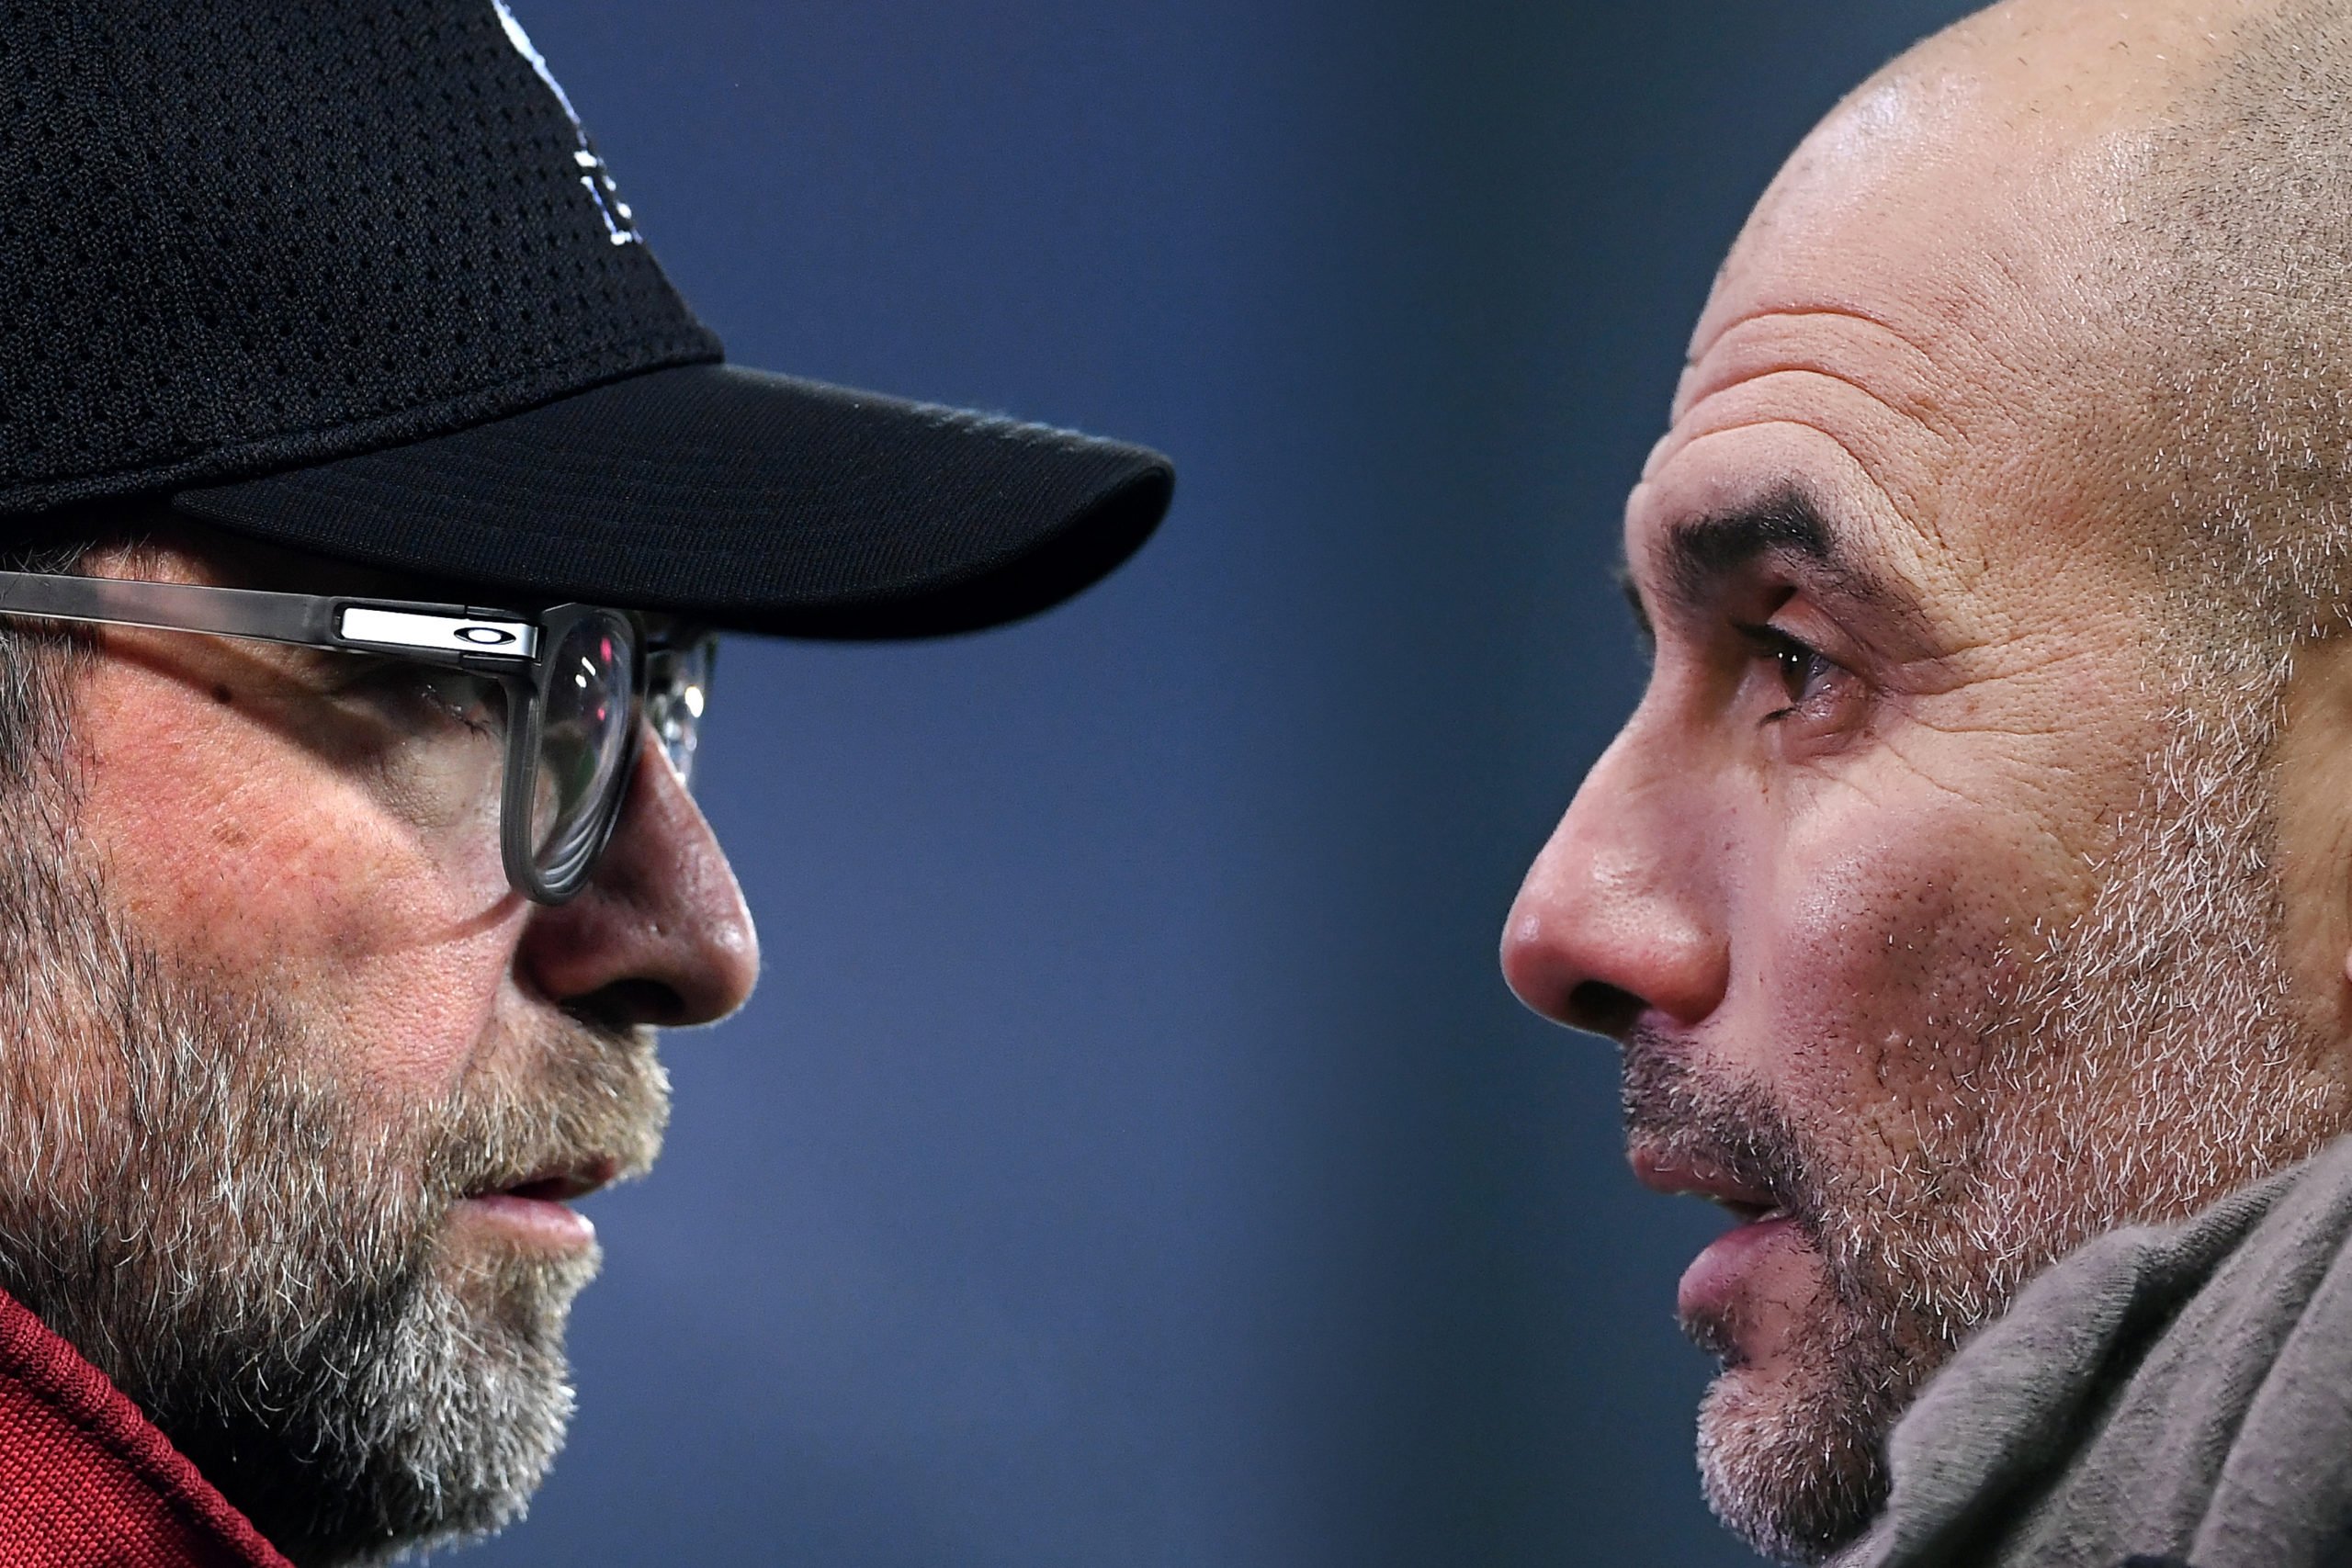 Liverpool Vs Manchester City Preview - Who will win?